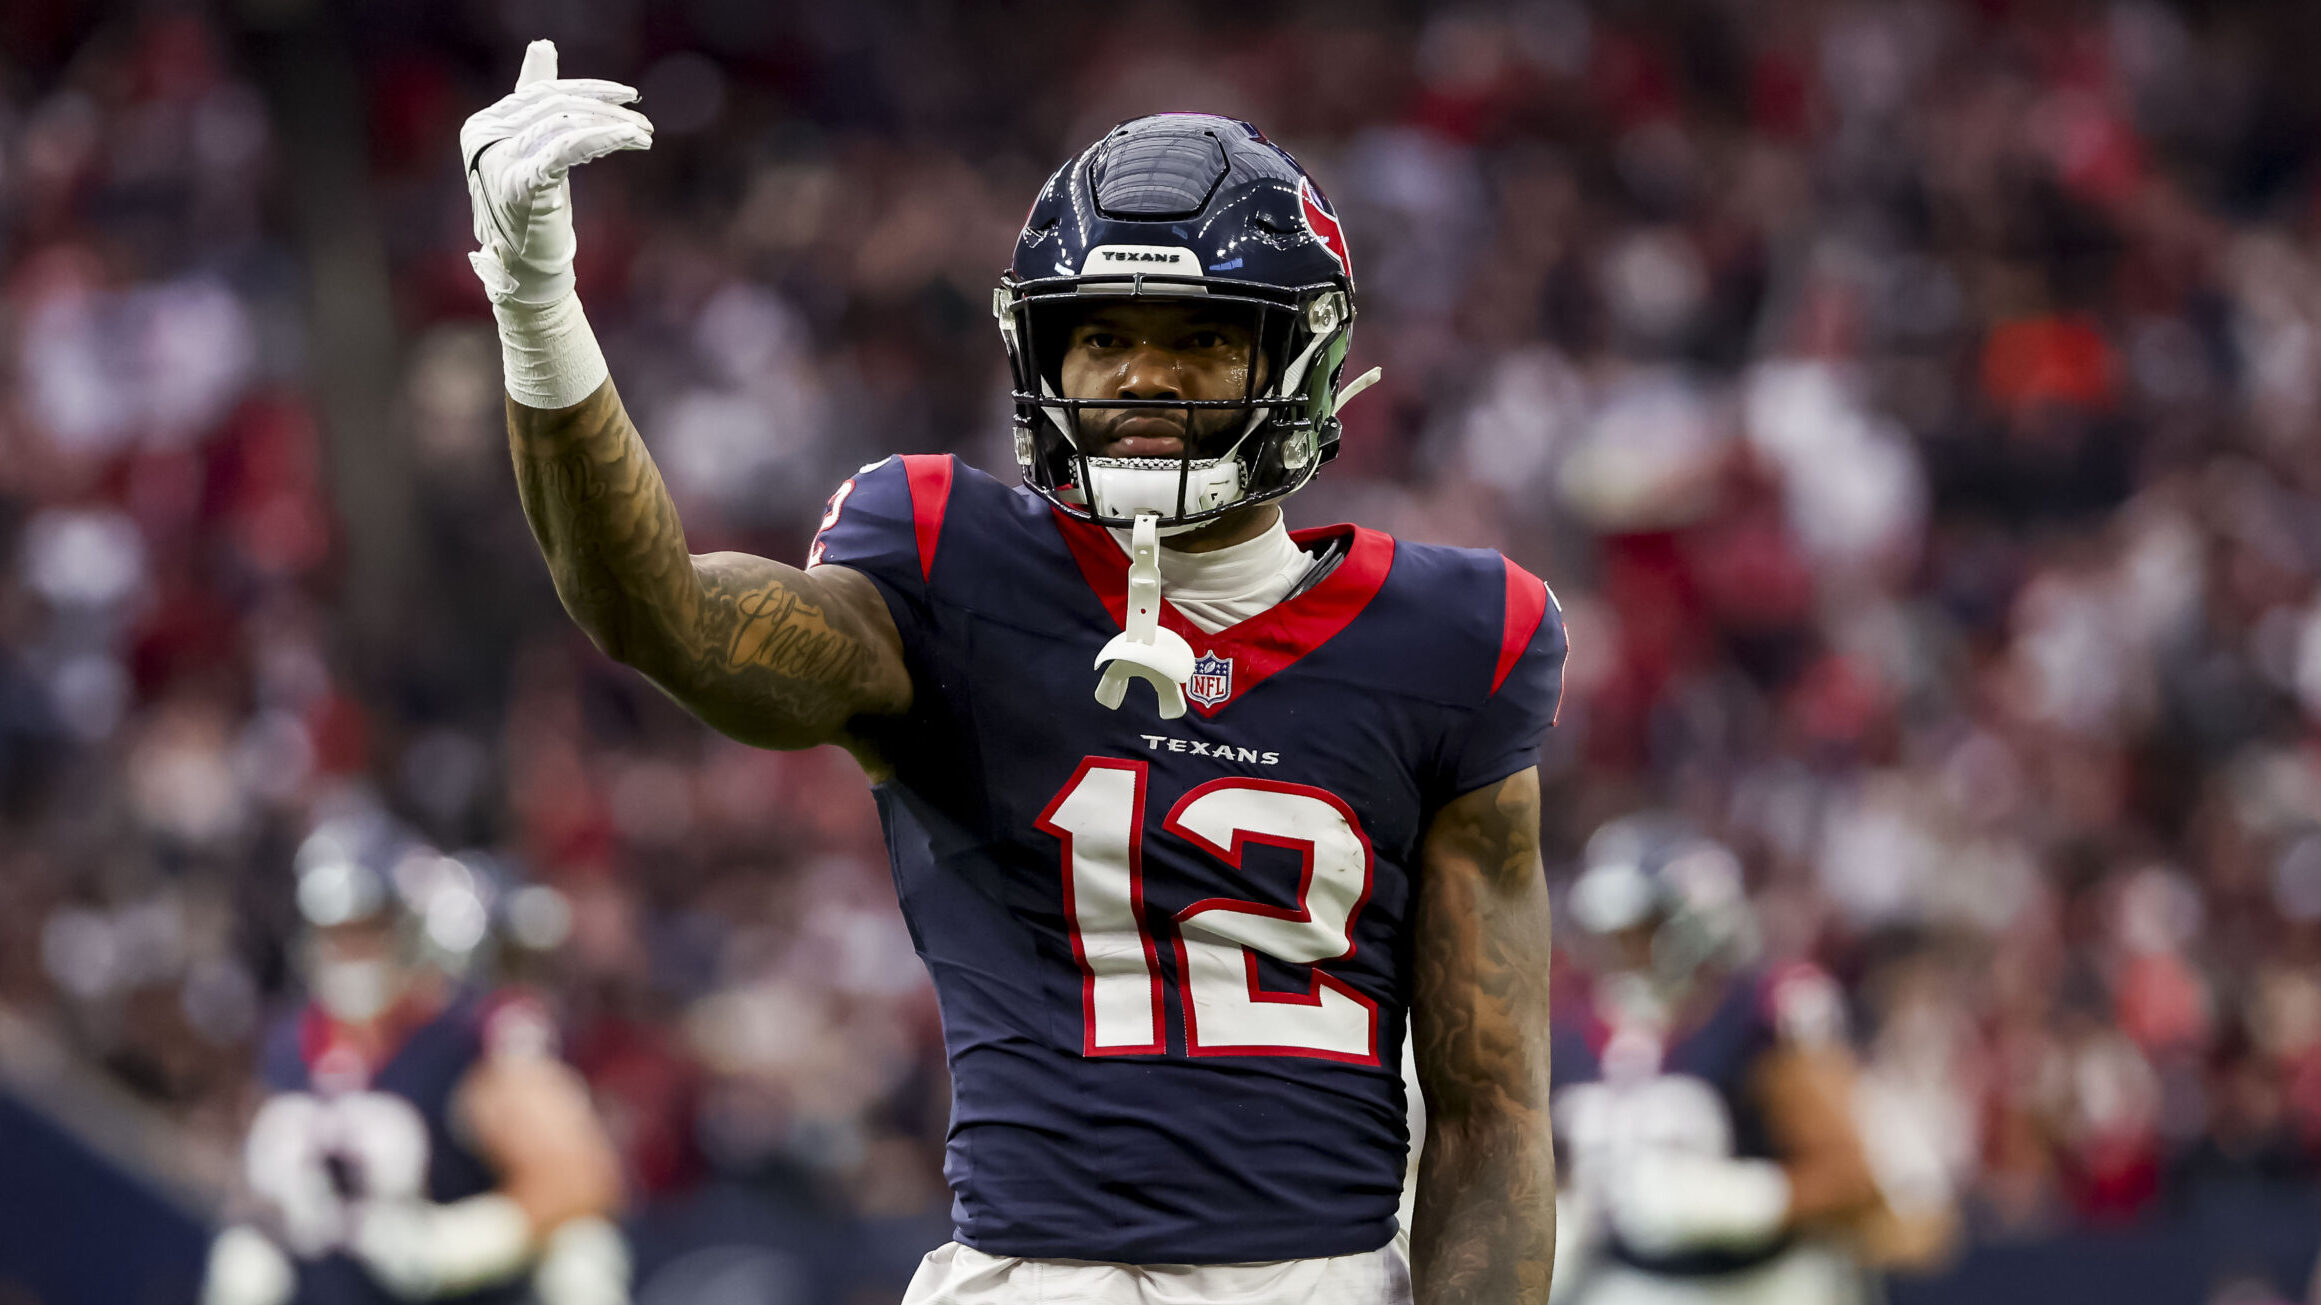 Texans WR Nico Collins celebrates after making a catch